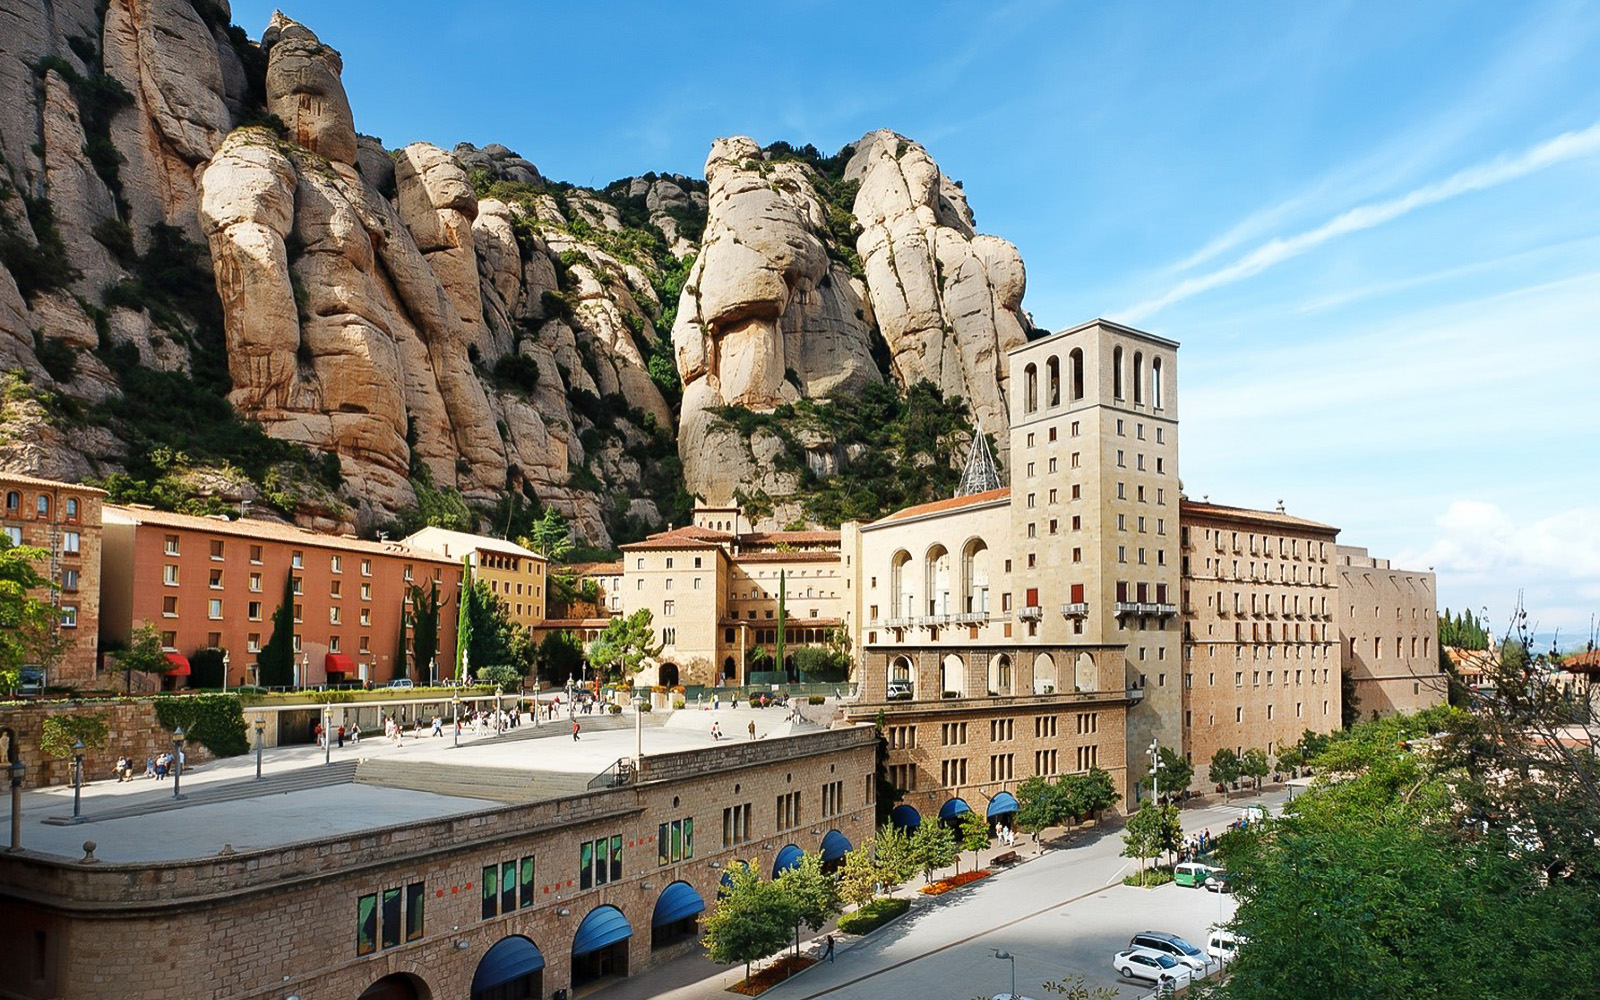 Image of Montserrat Monastery Guided Tour with Transfers and Cog-Wheel Train